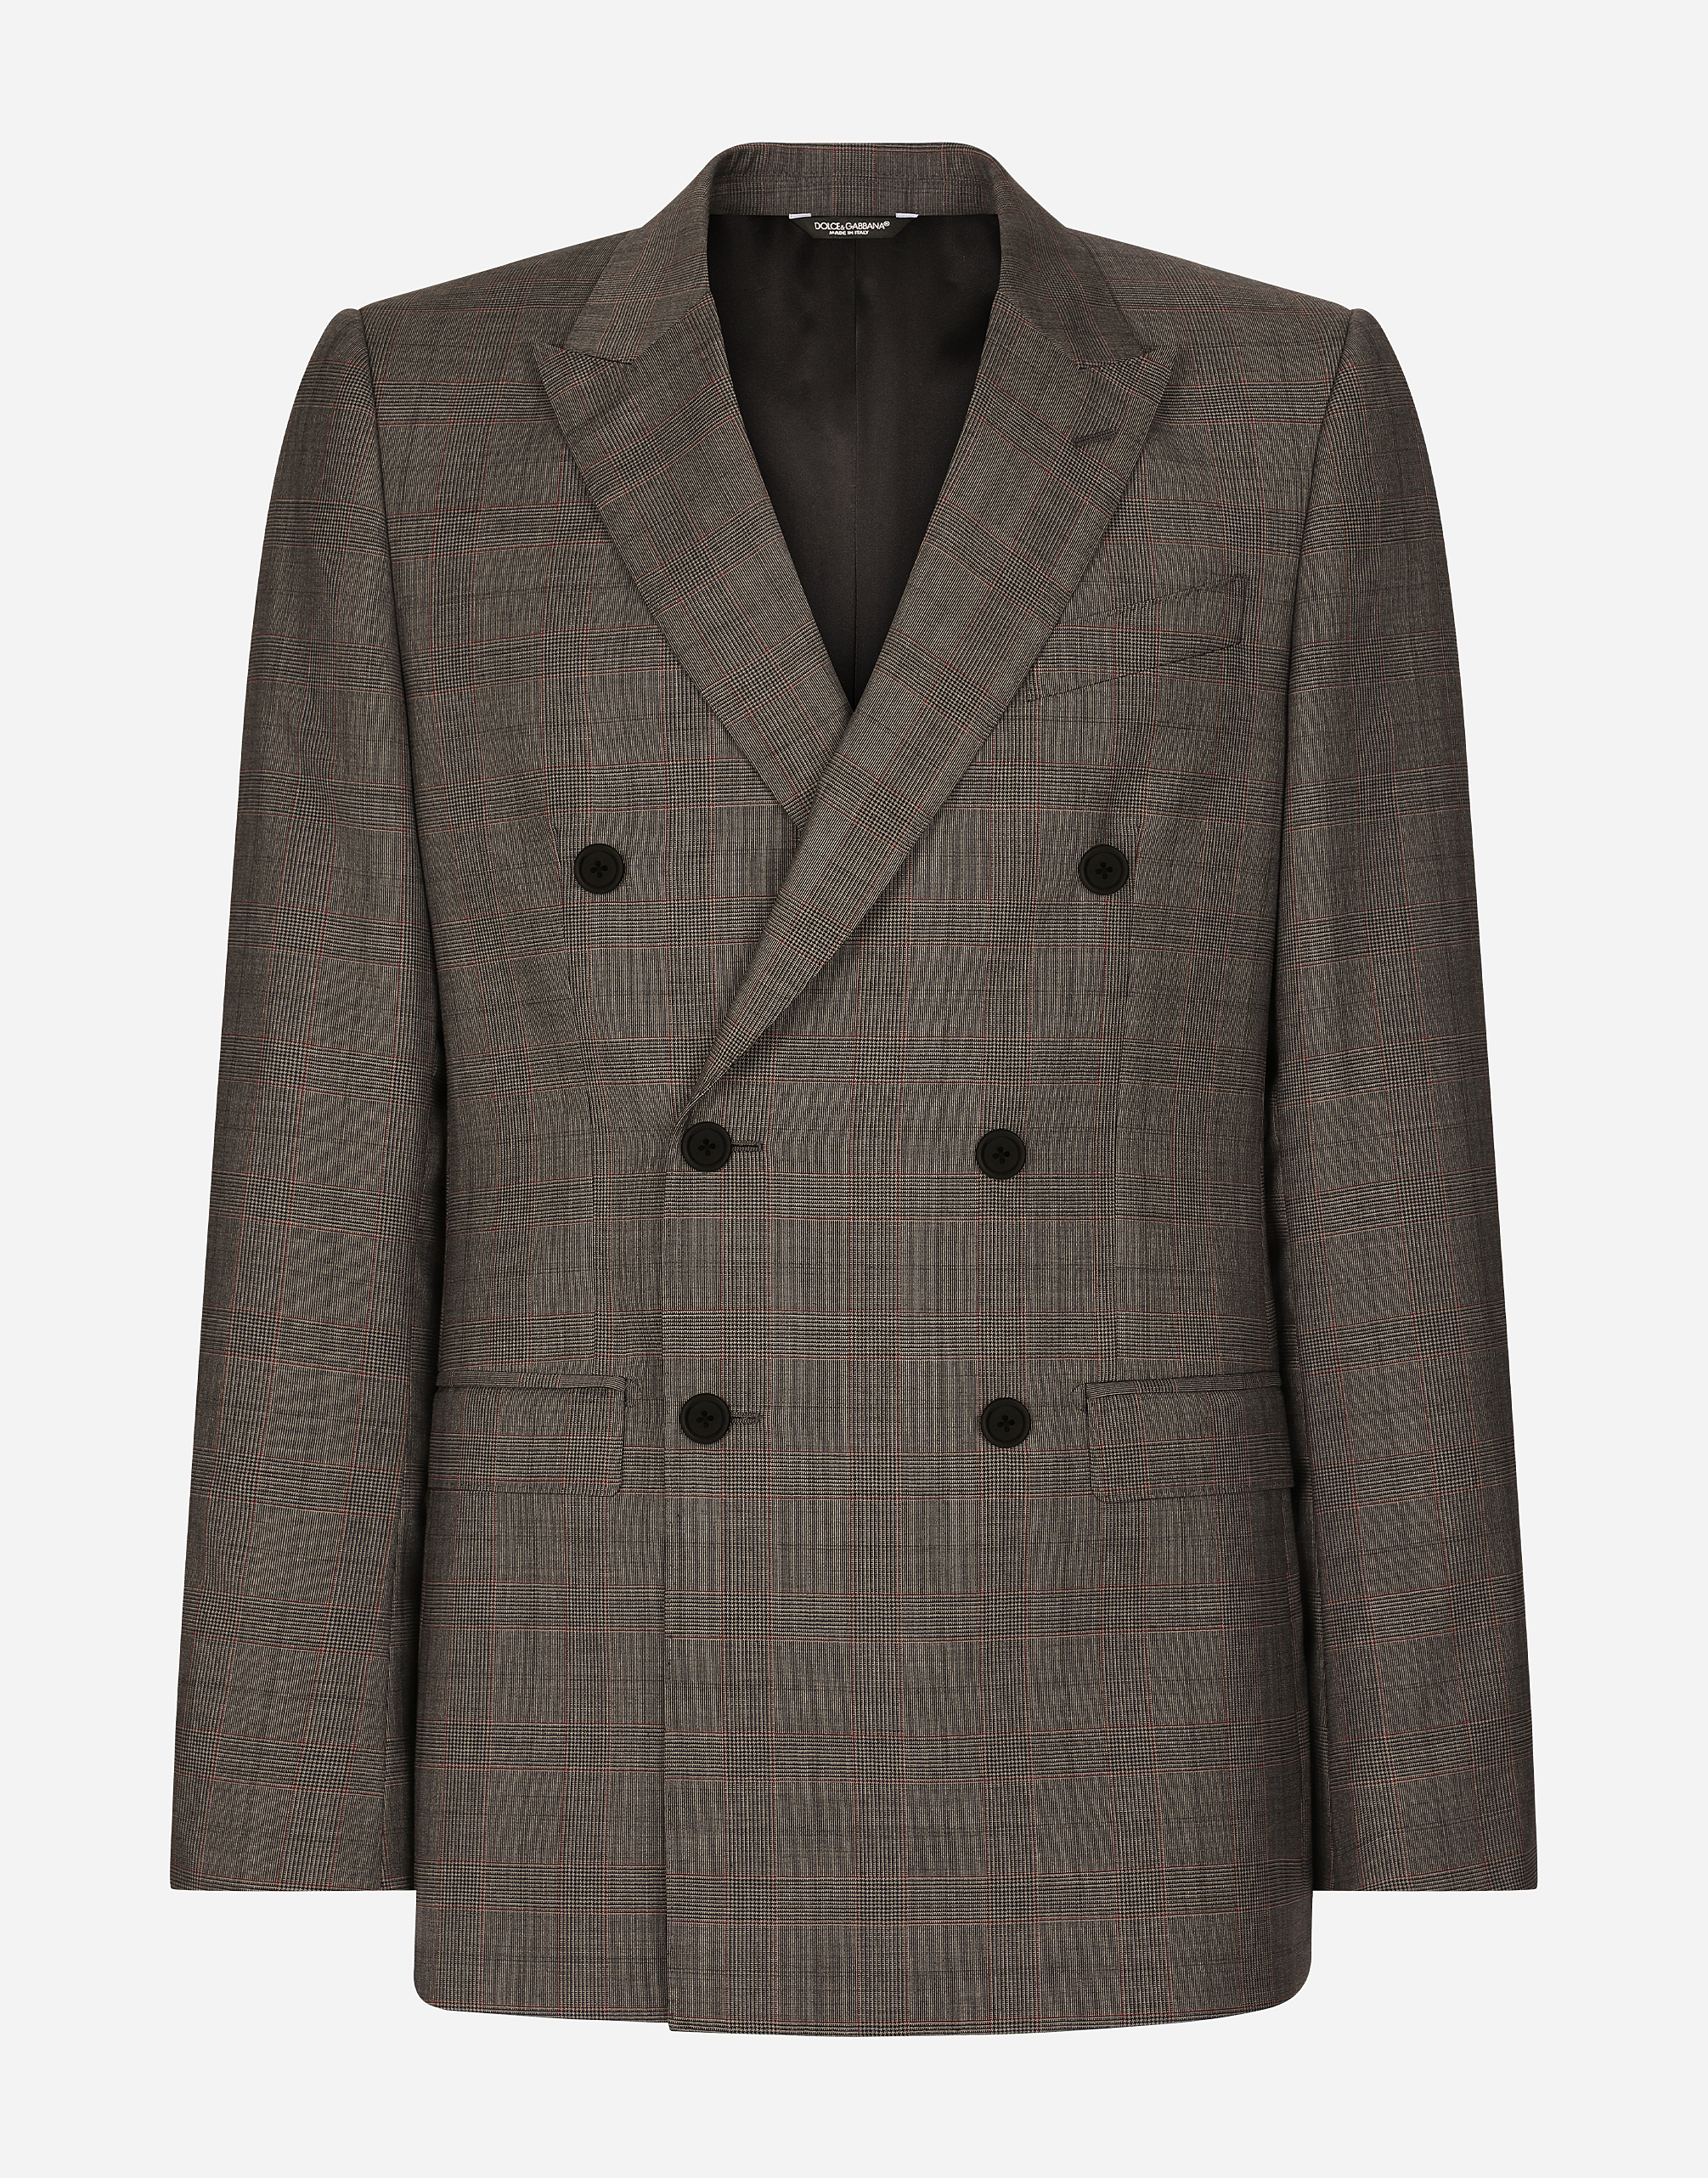 DOLCE & GABBANA DOUBLE-BREASTED GLEN PLAID MARTINI-FIT SUIT